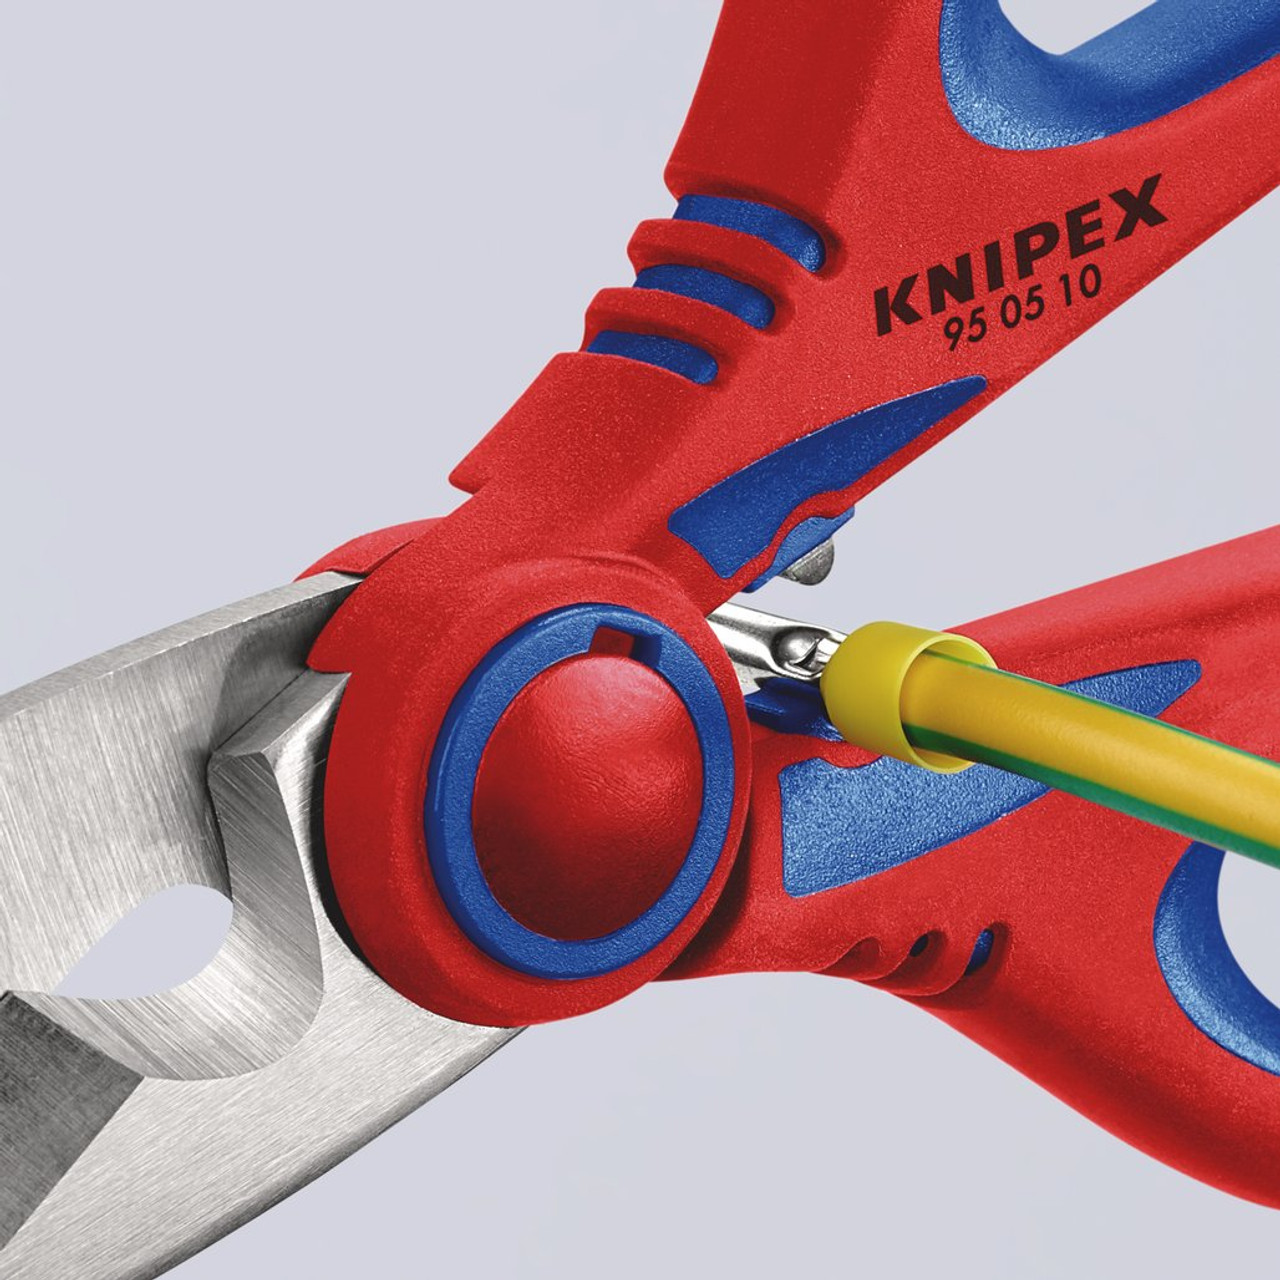 KNIPEX 95 05 10 SB 160mm Electricians Cable Shears 21816